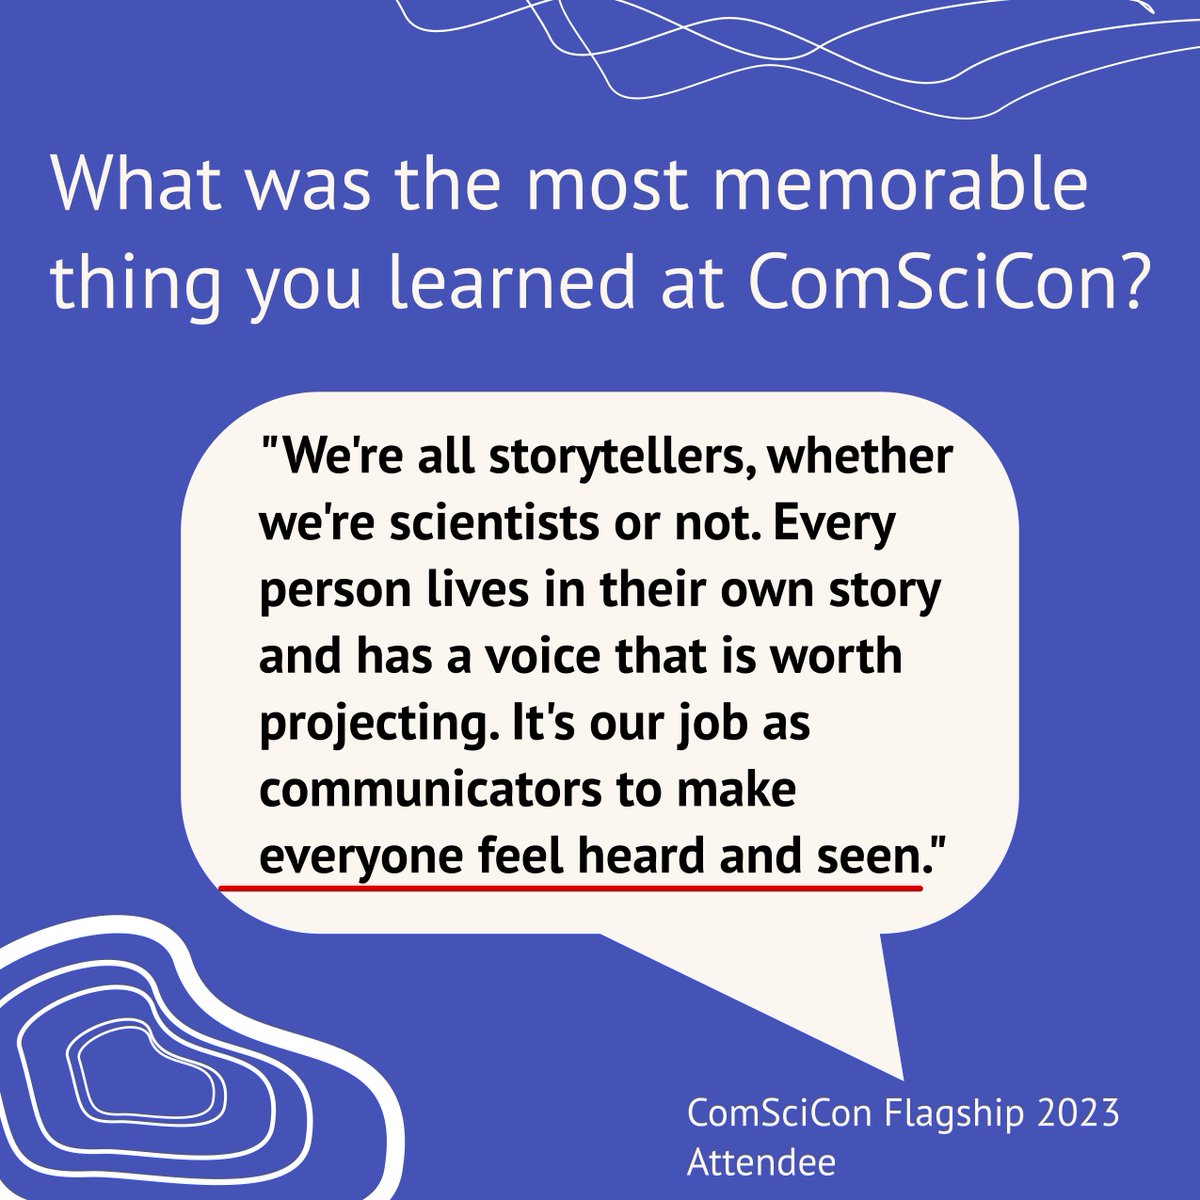 We’ve started the countdown--only 4 more days to submit your application to attend the #ComSciCon 2024 Flagship workshop! Applications due on March 31st at 11:59pm EST. Submit: bit.ly/3uMJGv2. For motivation, here is what an attendee said last year about their experience